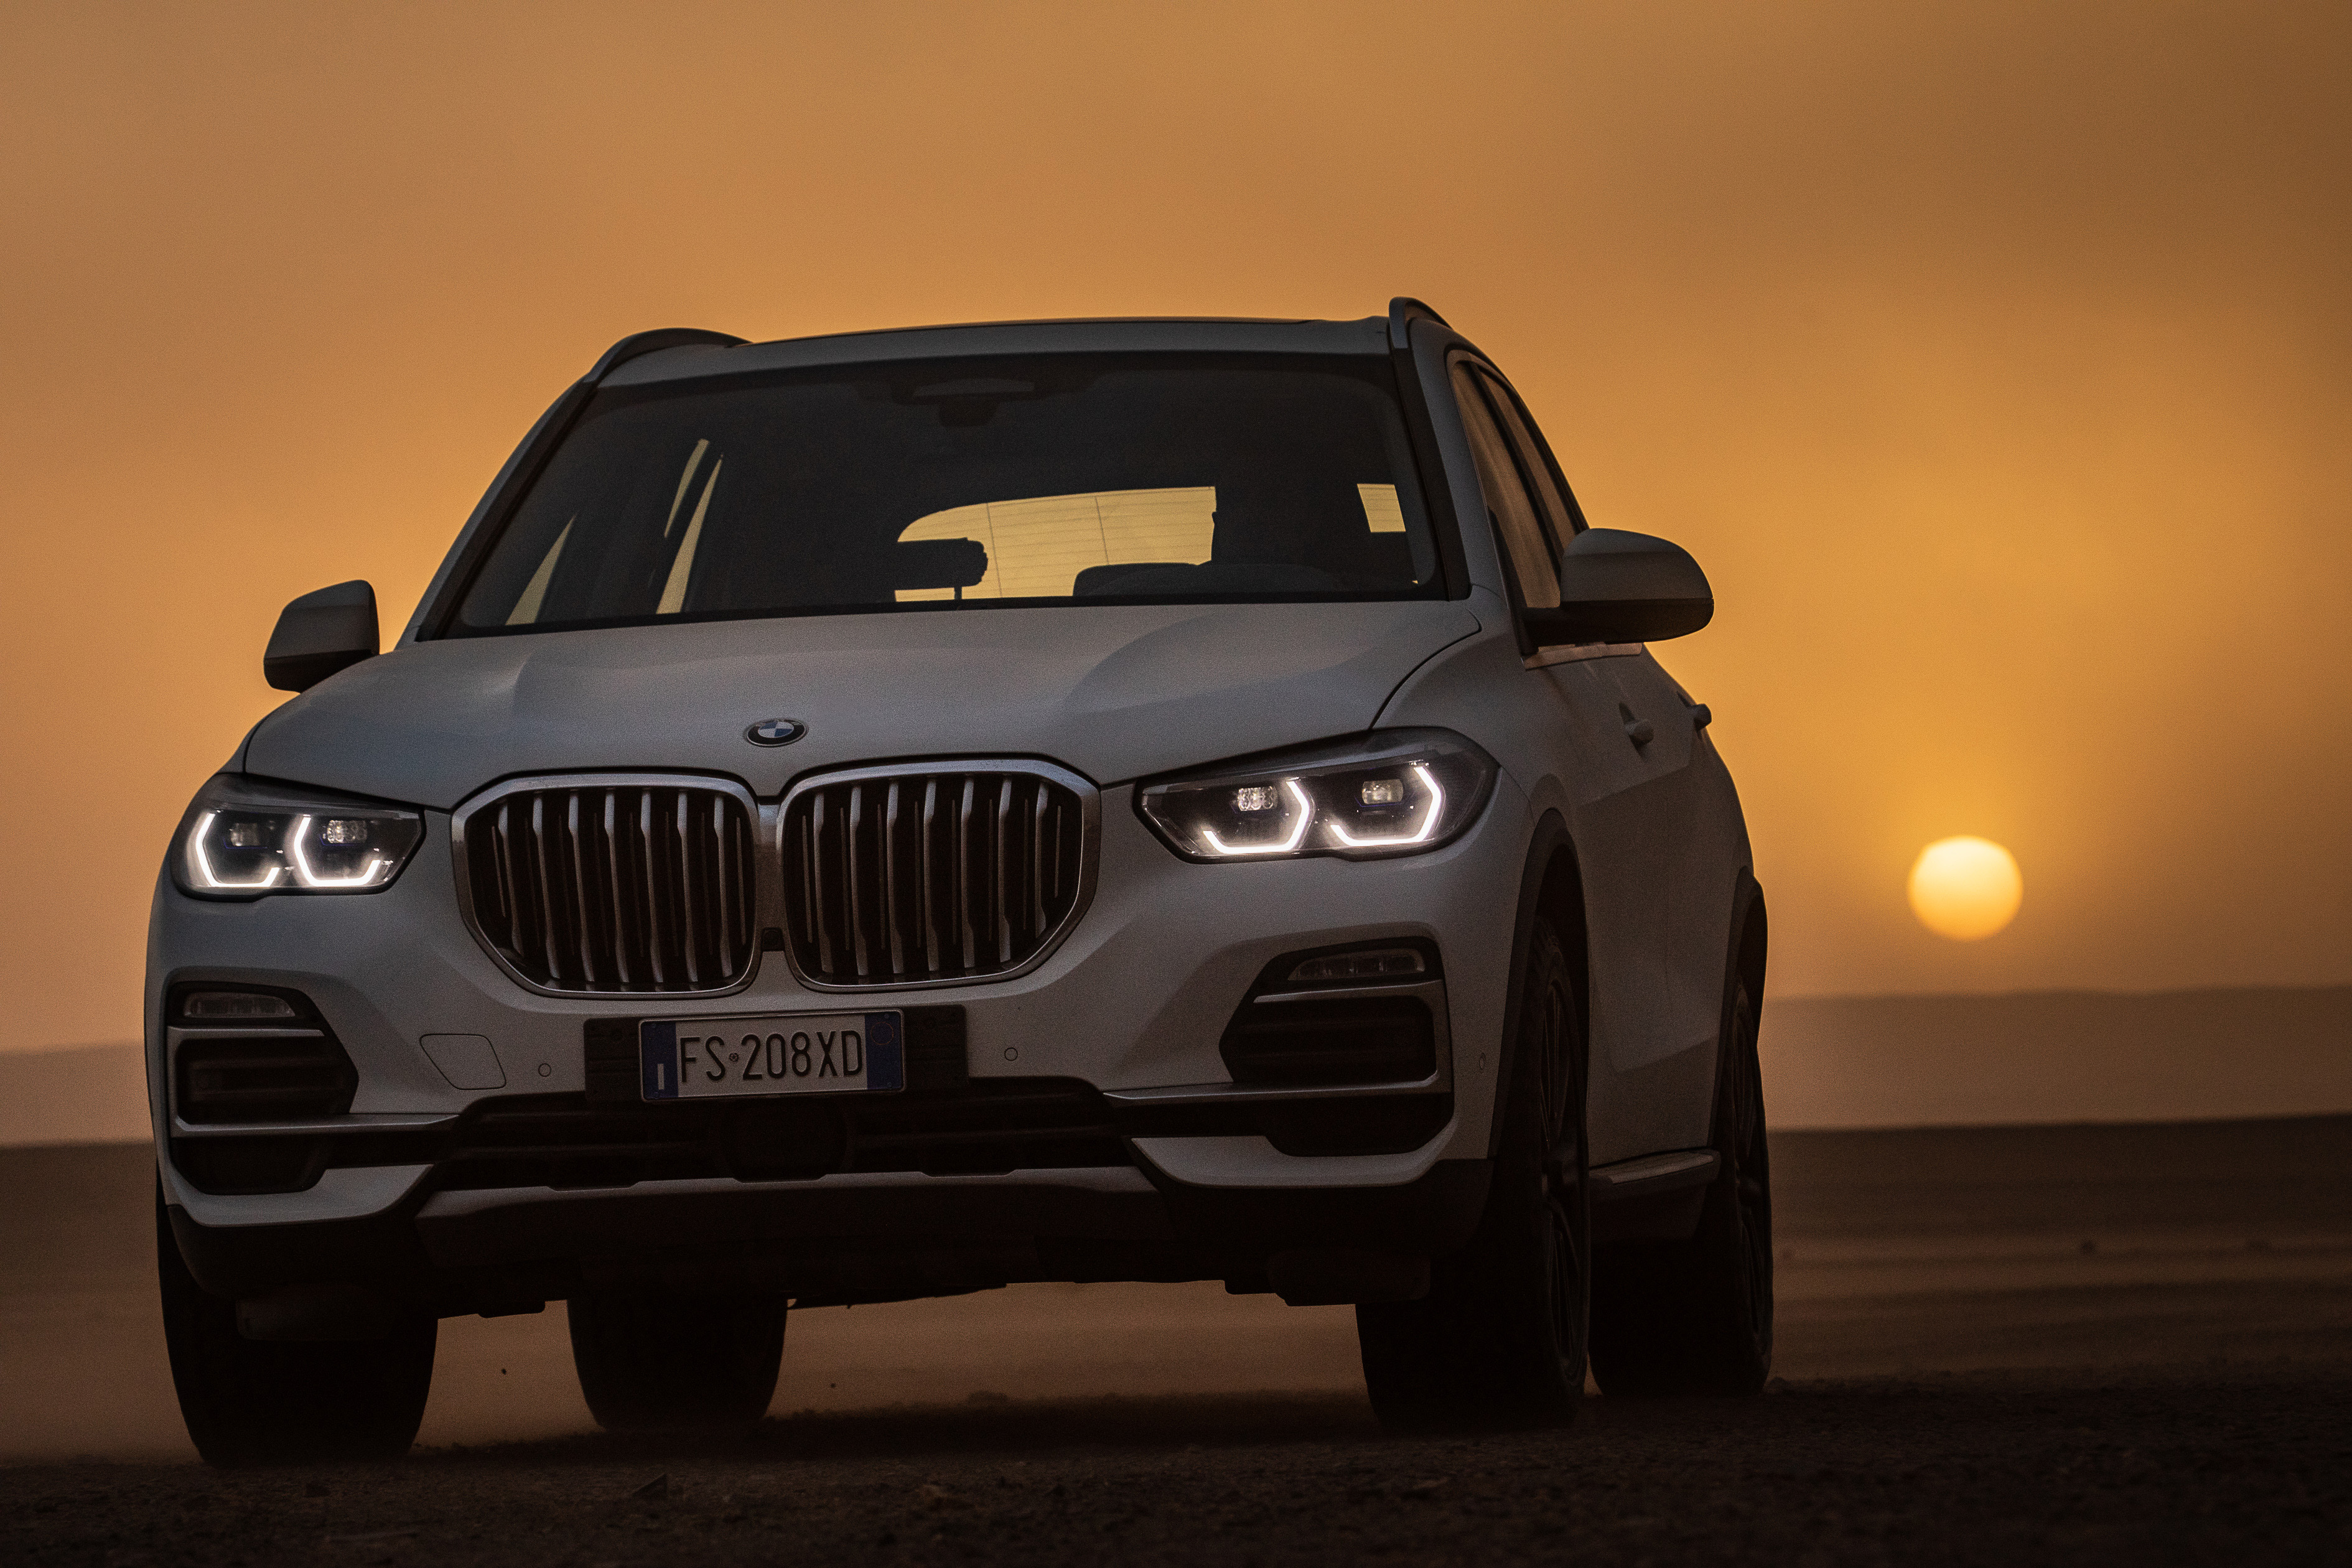 Consumer Reports Picks New X5 As Best Luxury SUV Of 2019 - BimmerLife